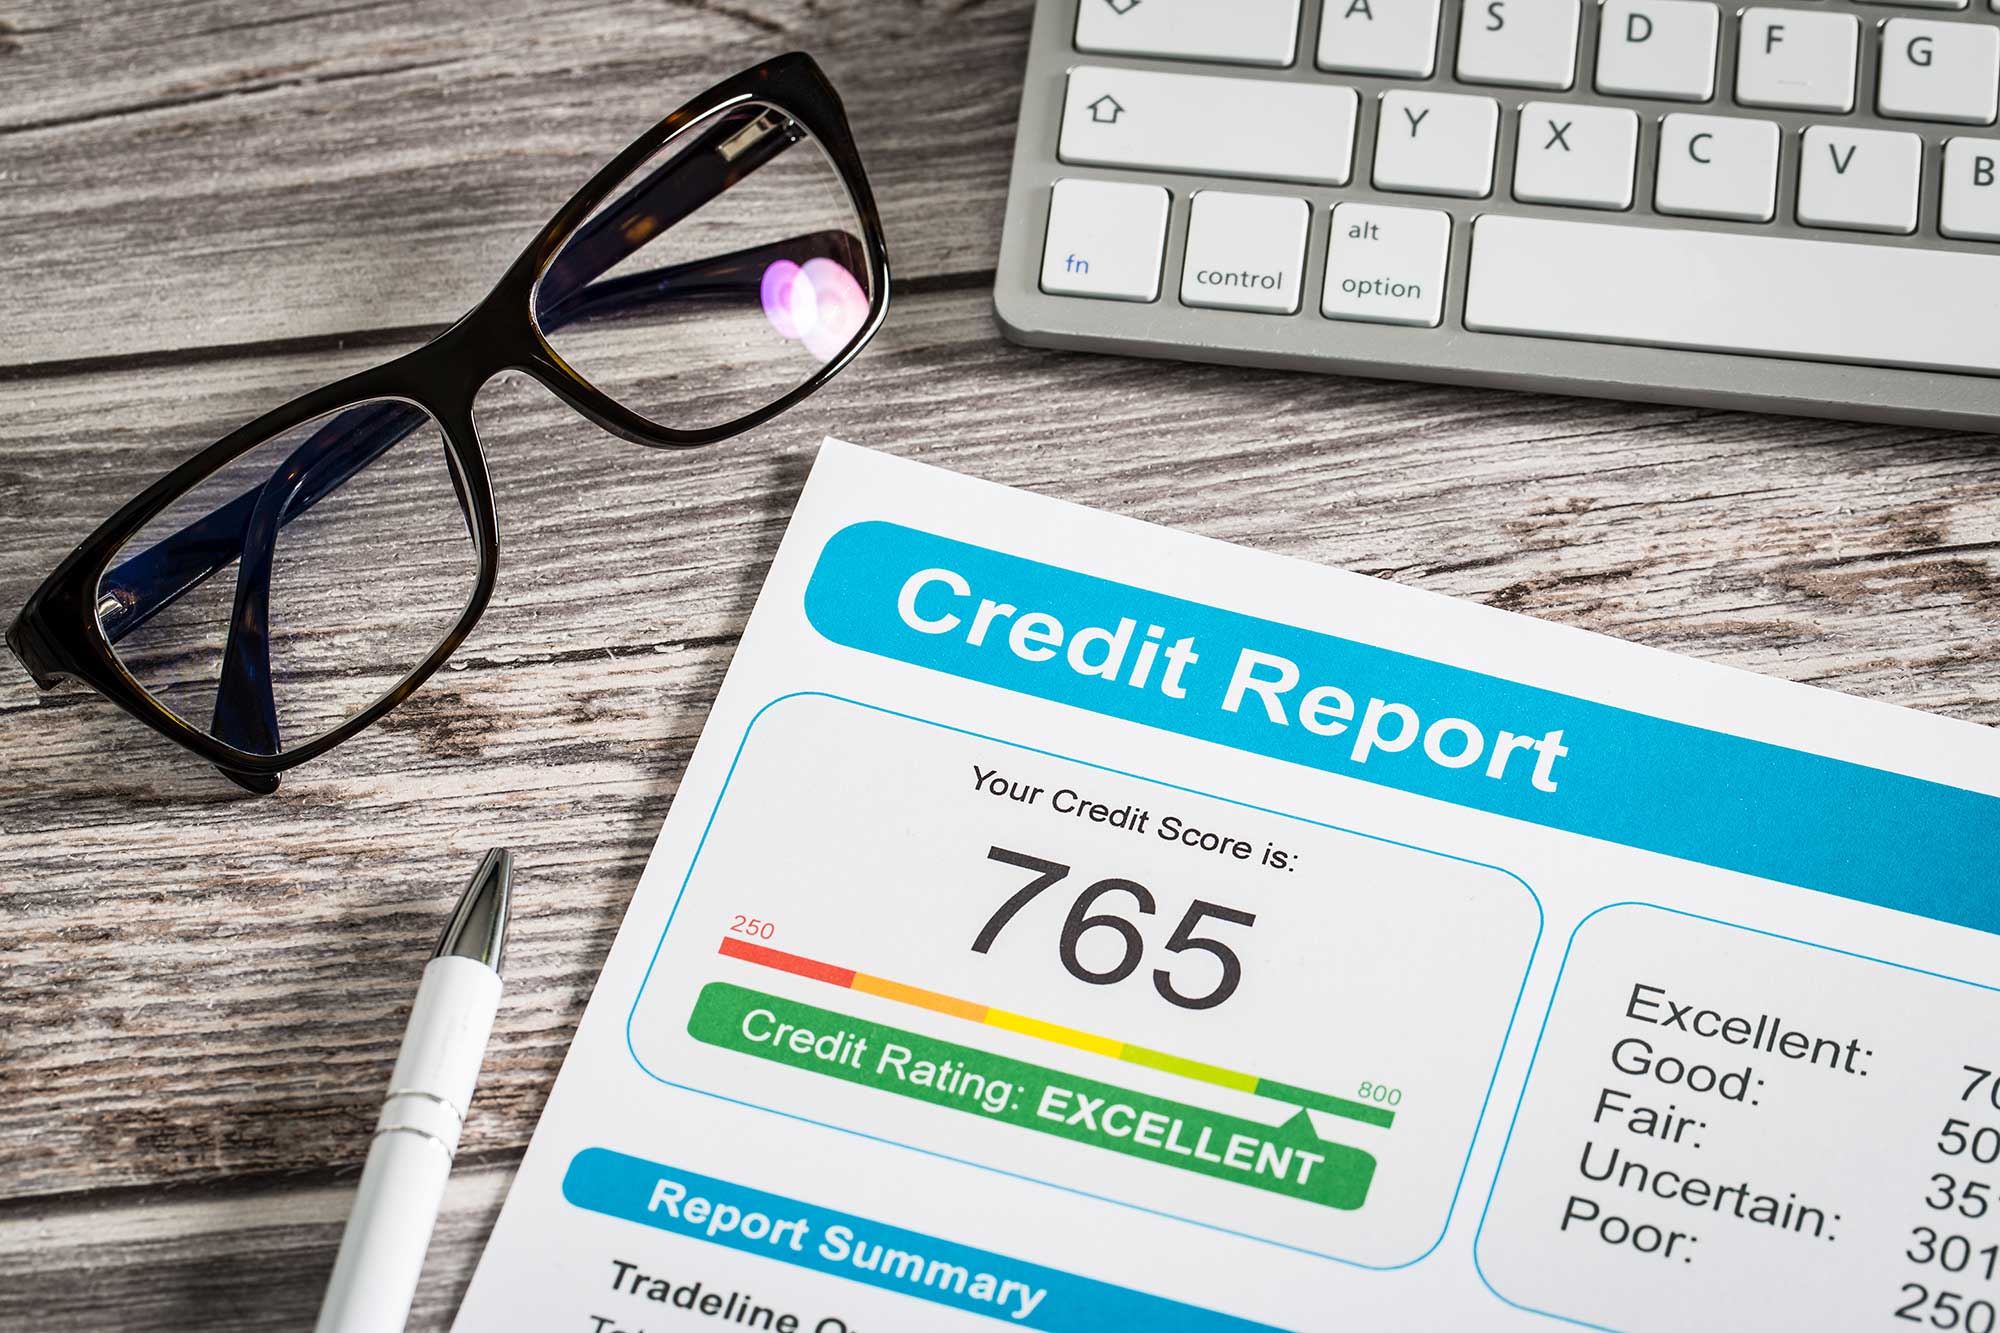 Get the Credit Score Everybody Wants